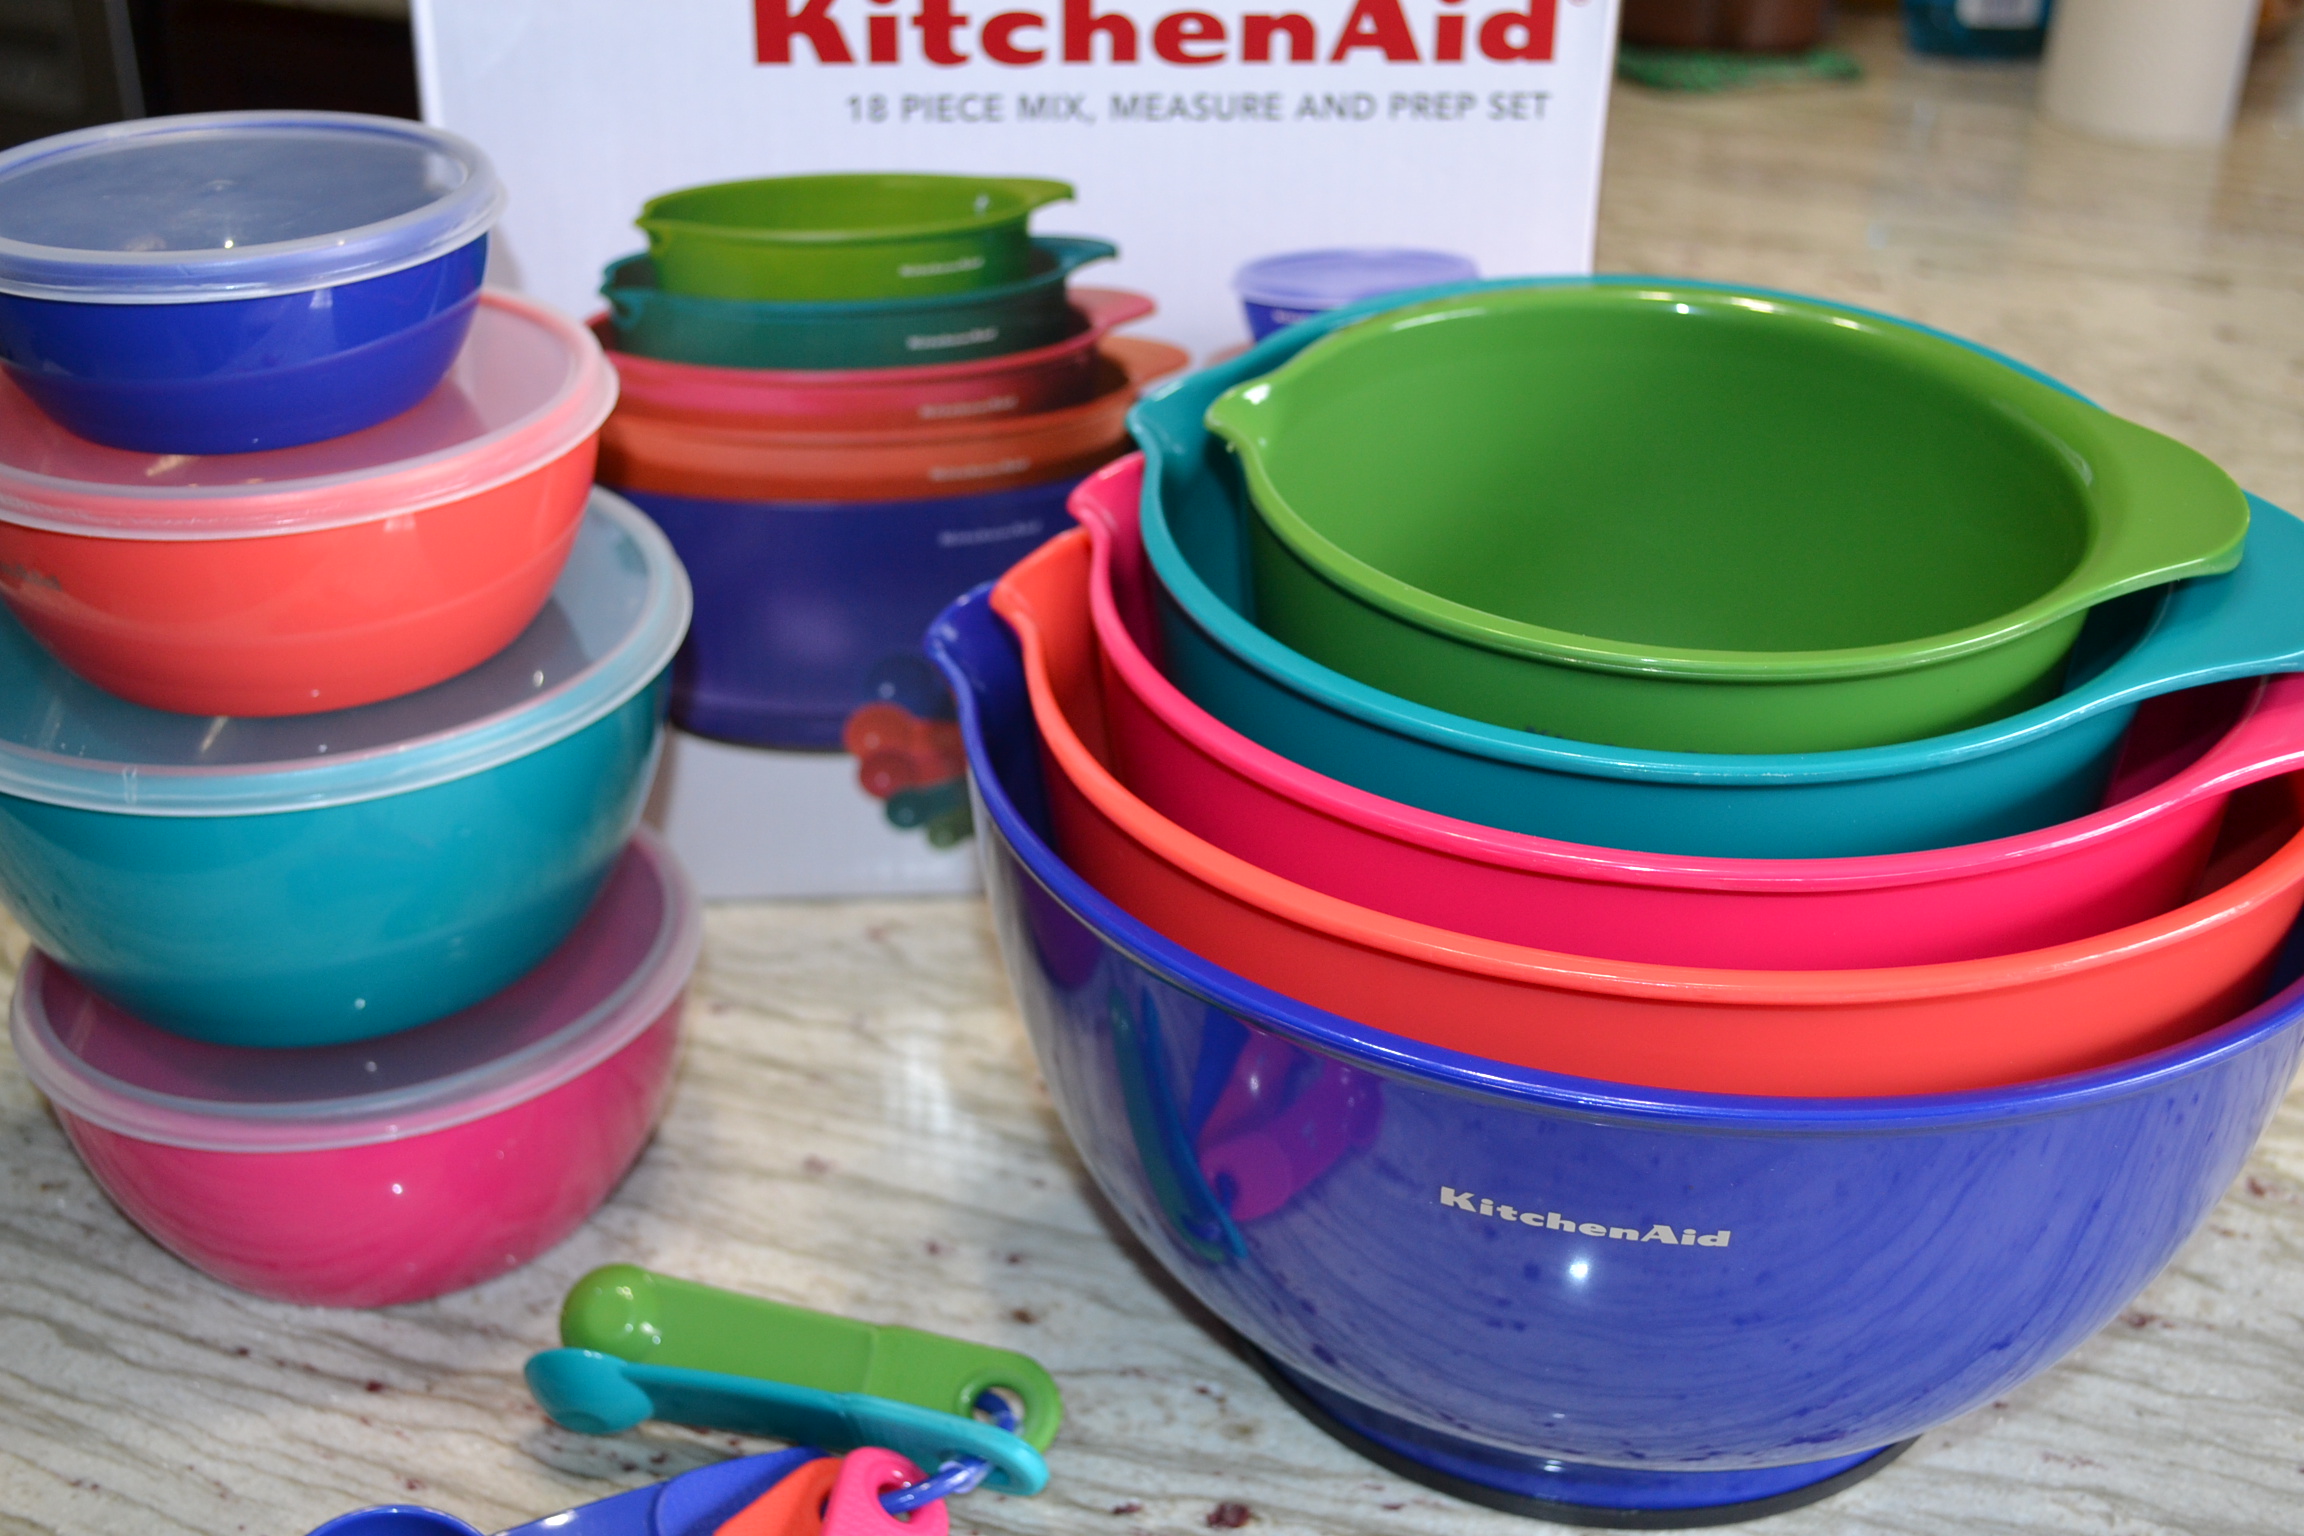 A cute and colorful collection of kitchen items for this spring giveaway.